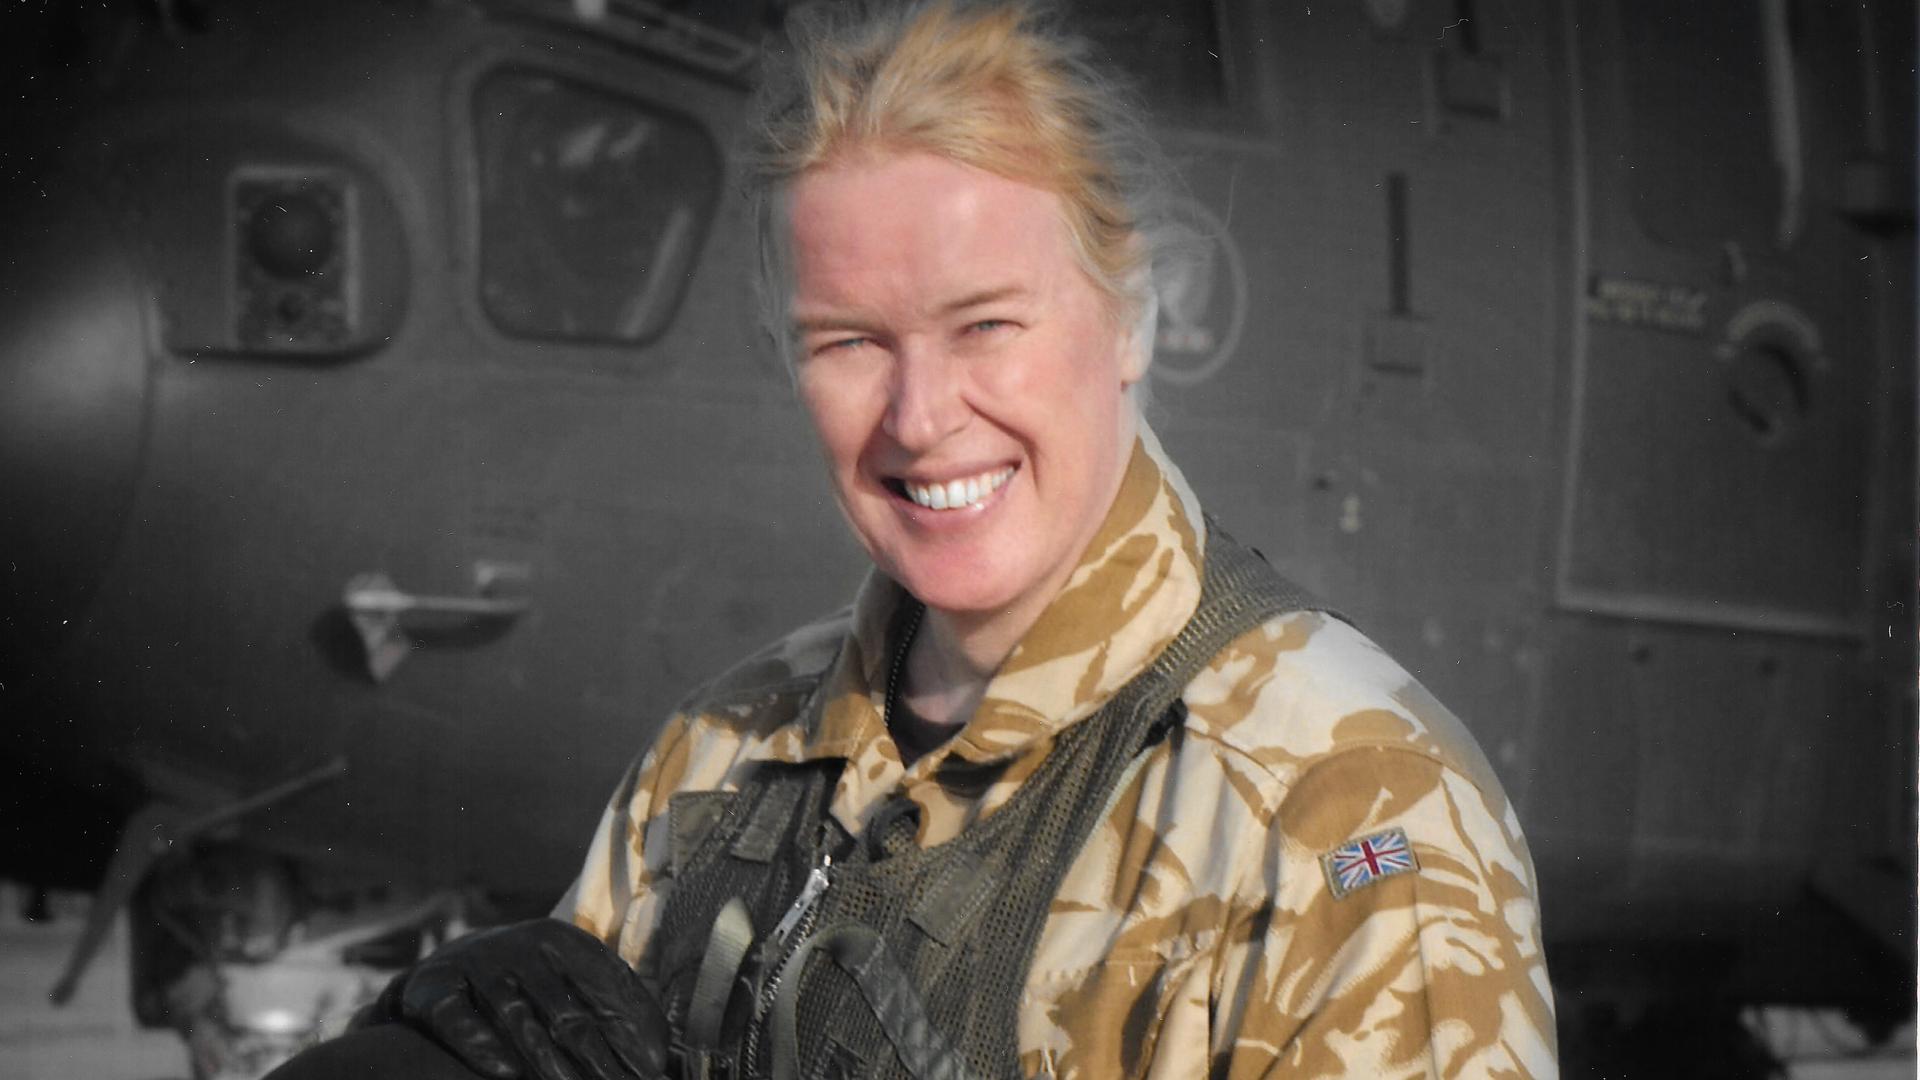 Flight Lt. Caroline Paige is the first openly transgender officer to serve in the Royal Air Force. She says once fellow officers saw she could do the job, her identity was no longer an issue.